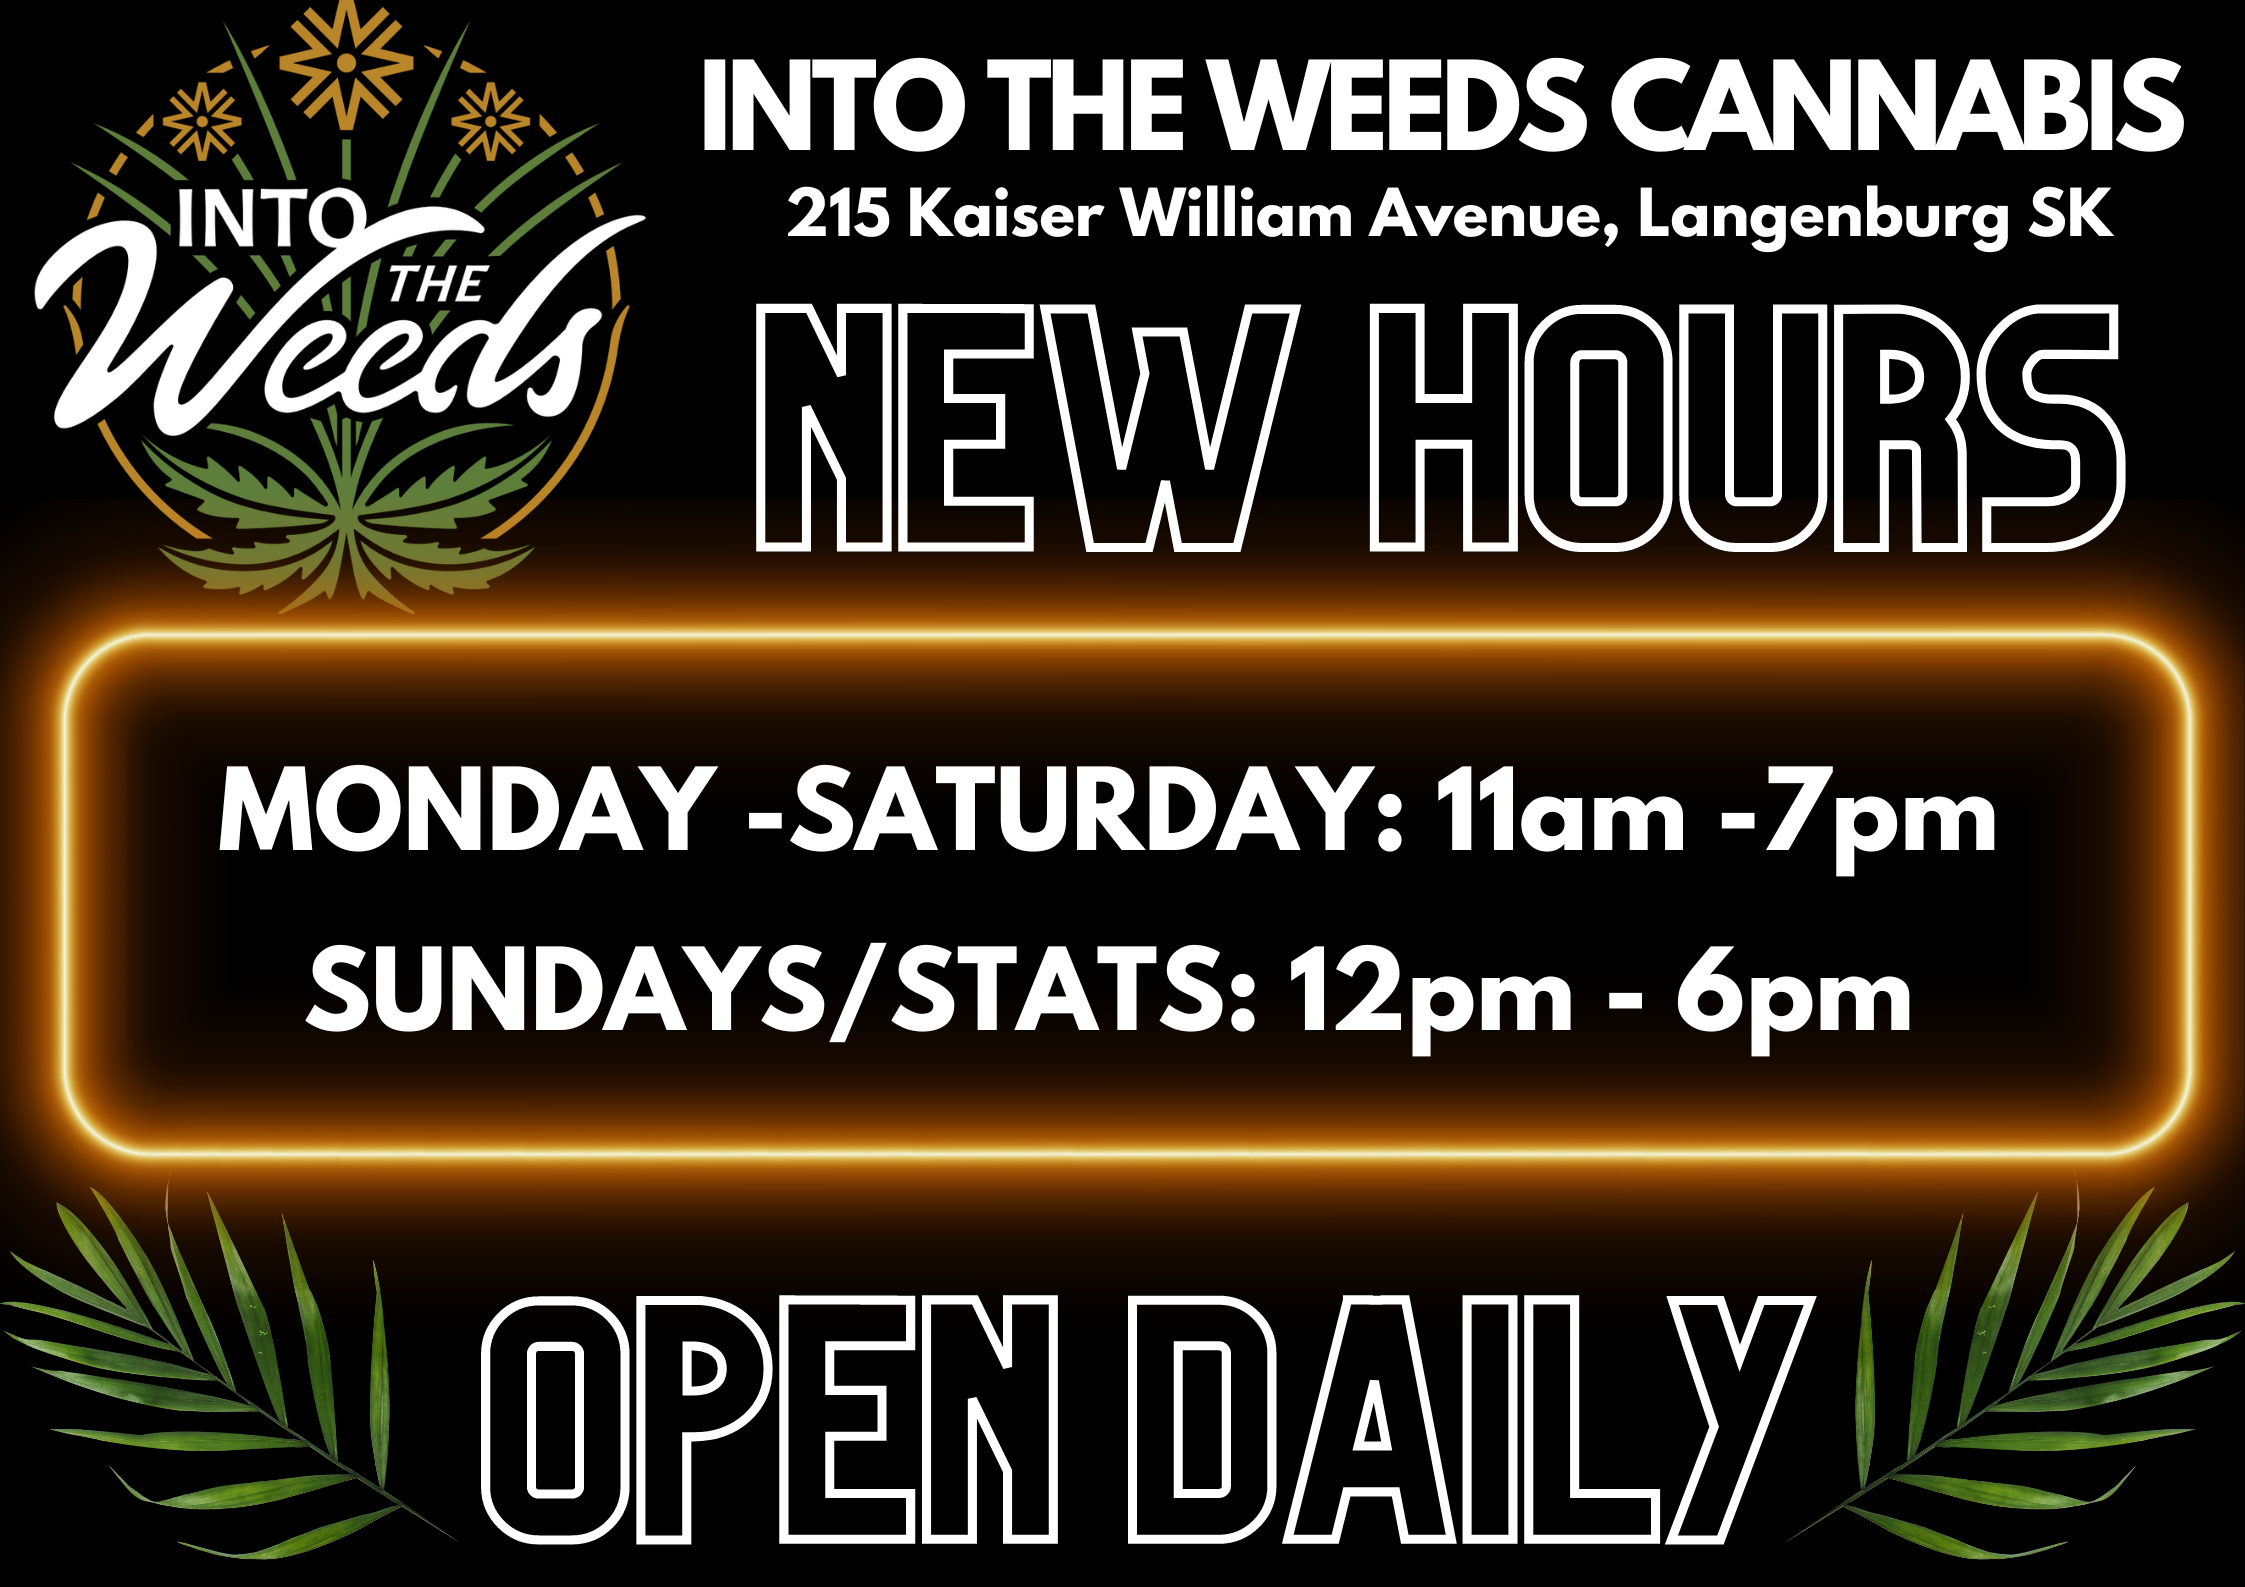 Into The Weeds Cannabis opened its doors in Langenburg this week on Tuesday, August 22nd. The company is located at 215 Kaiser William Avenue and is open daily from 11 A.M. - 7 P.M.